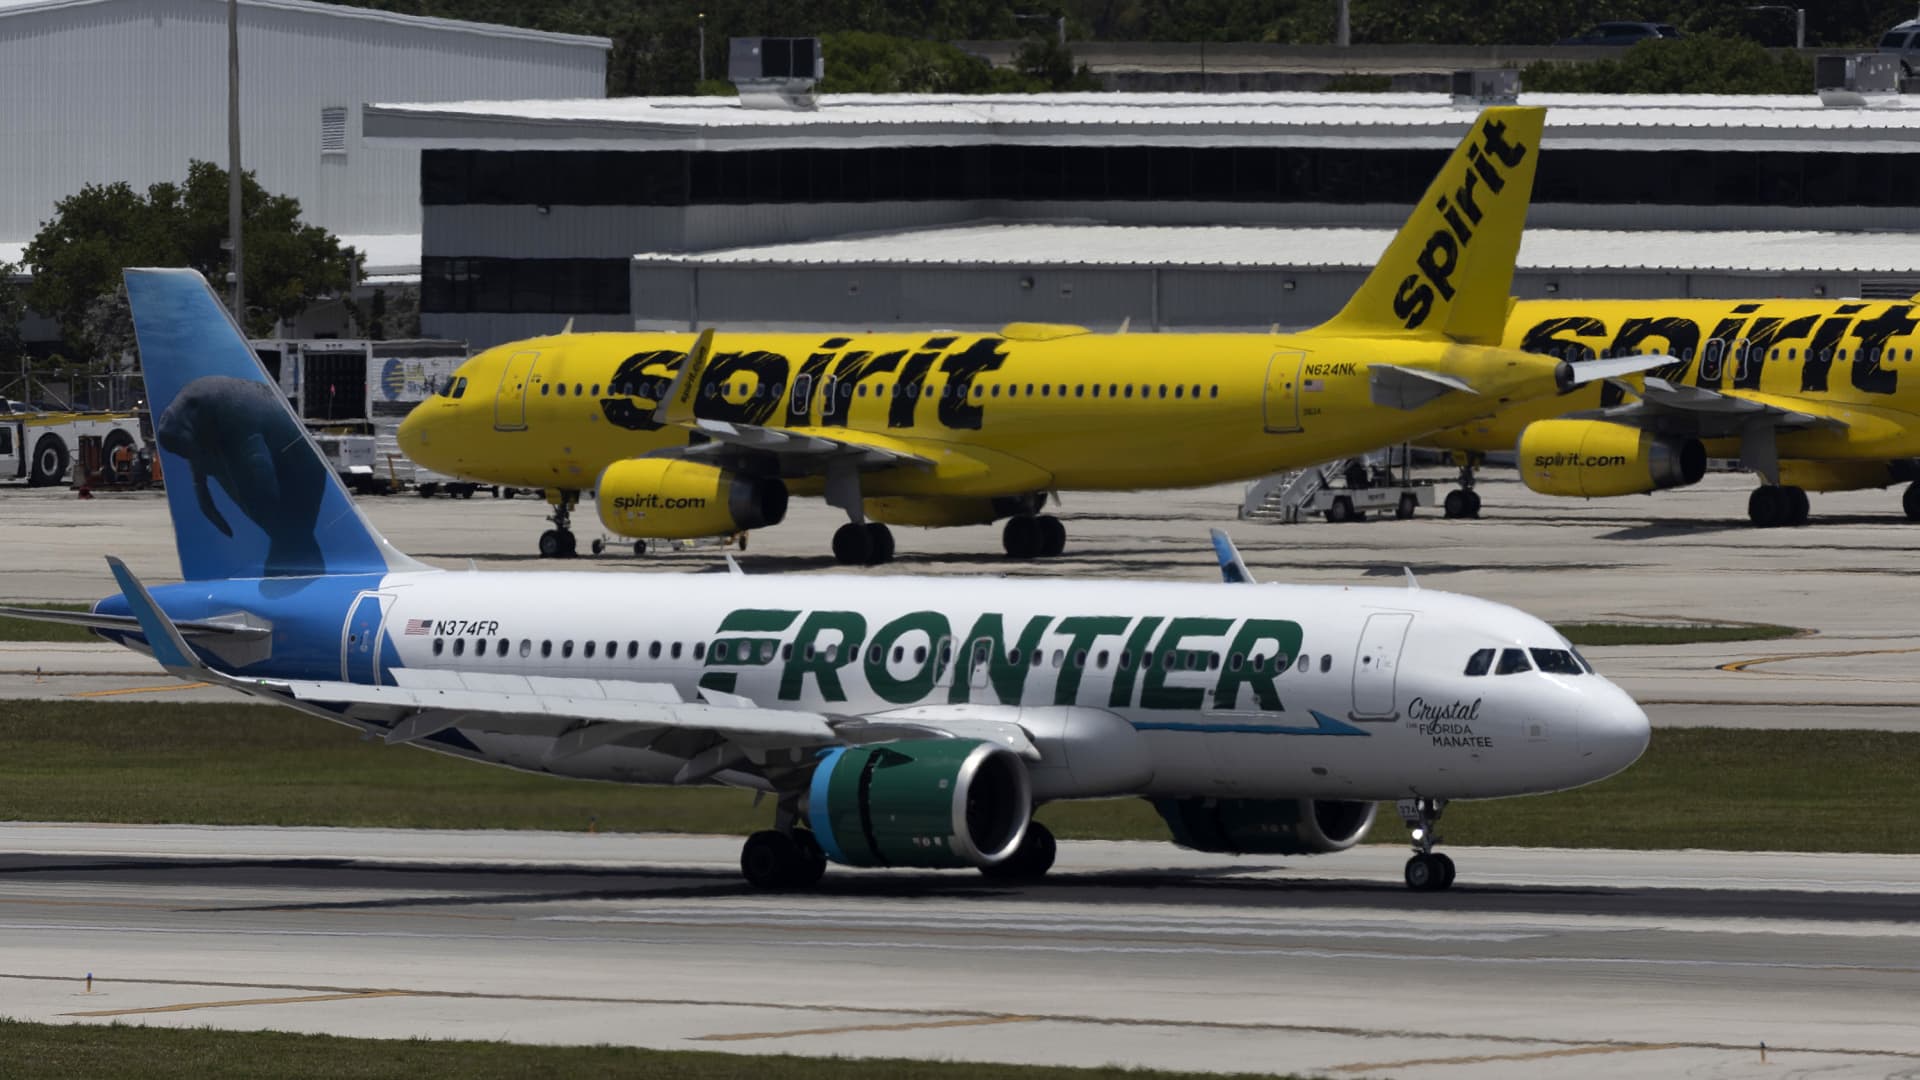 Spirit again delays vote on Frontier deal to continue deal talks with budget airline and JetBlue